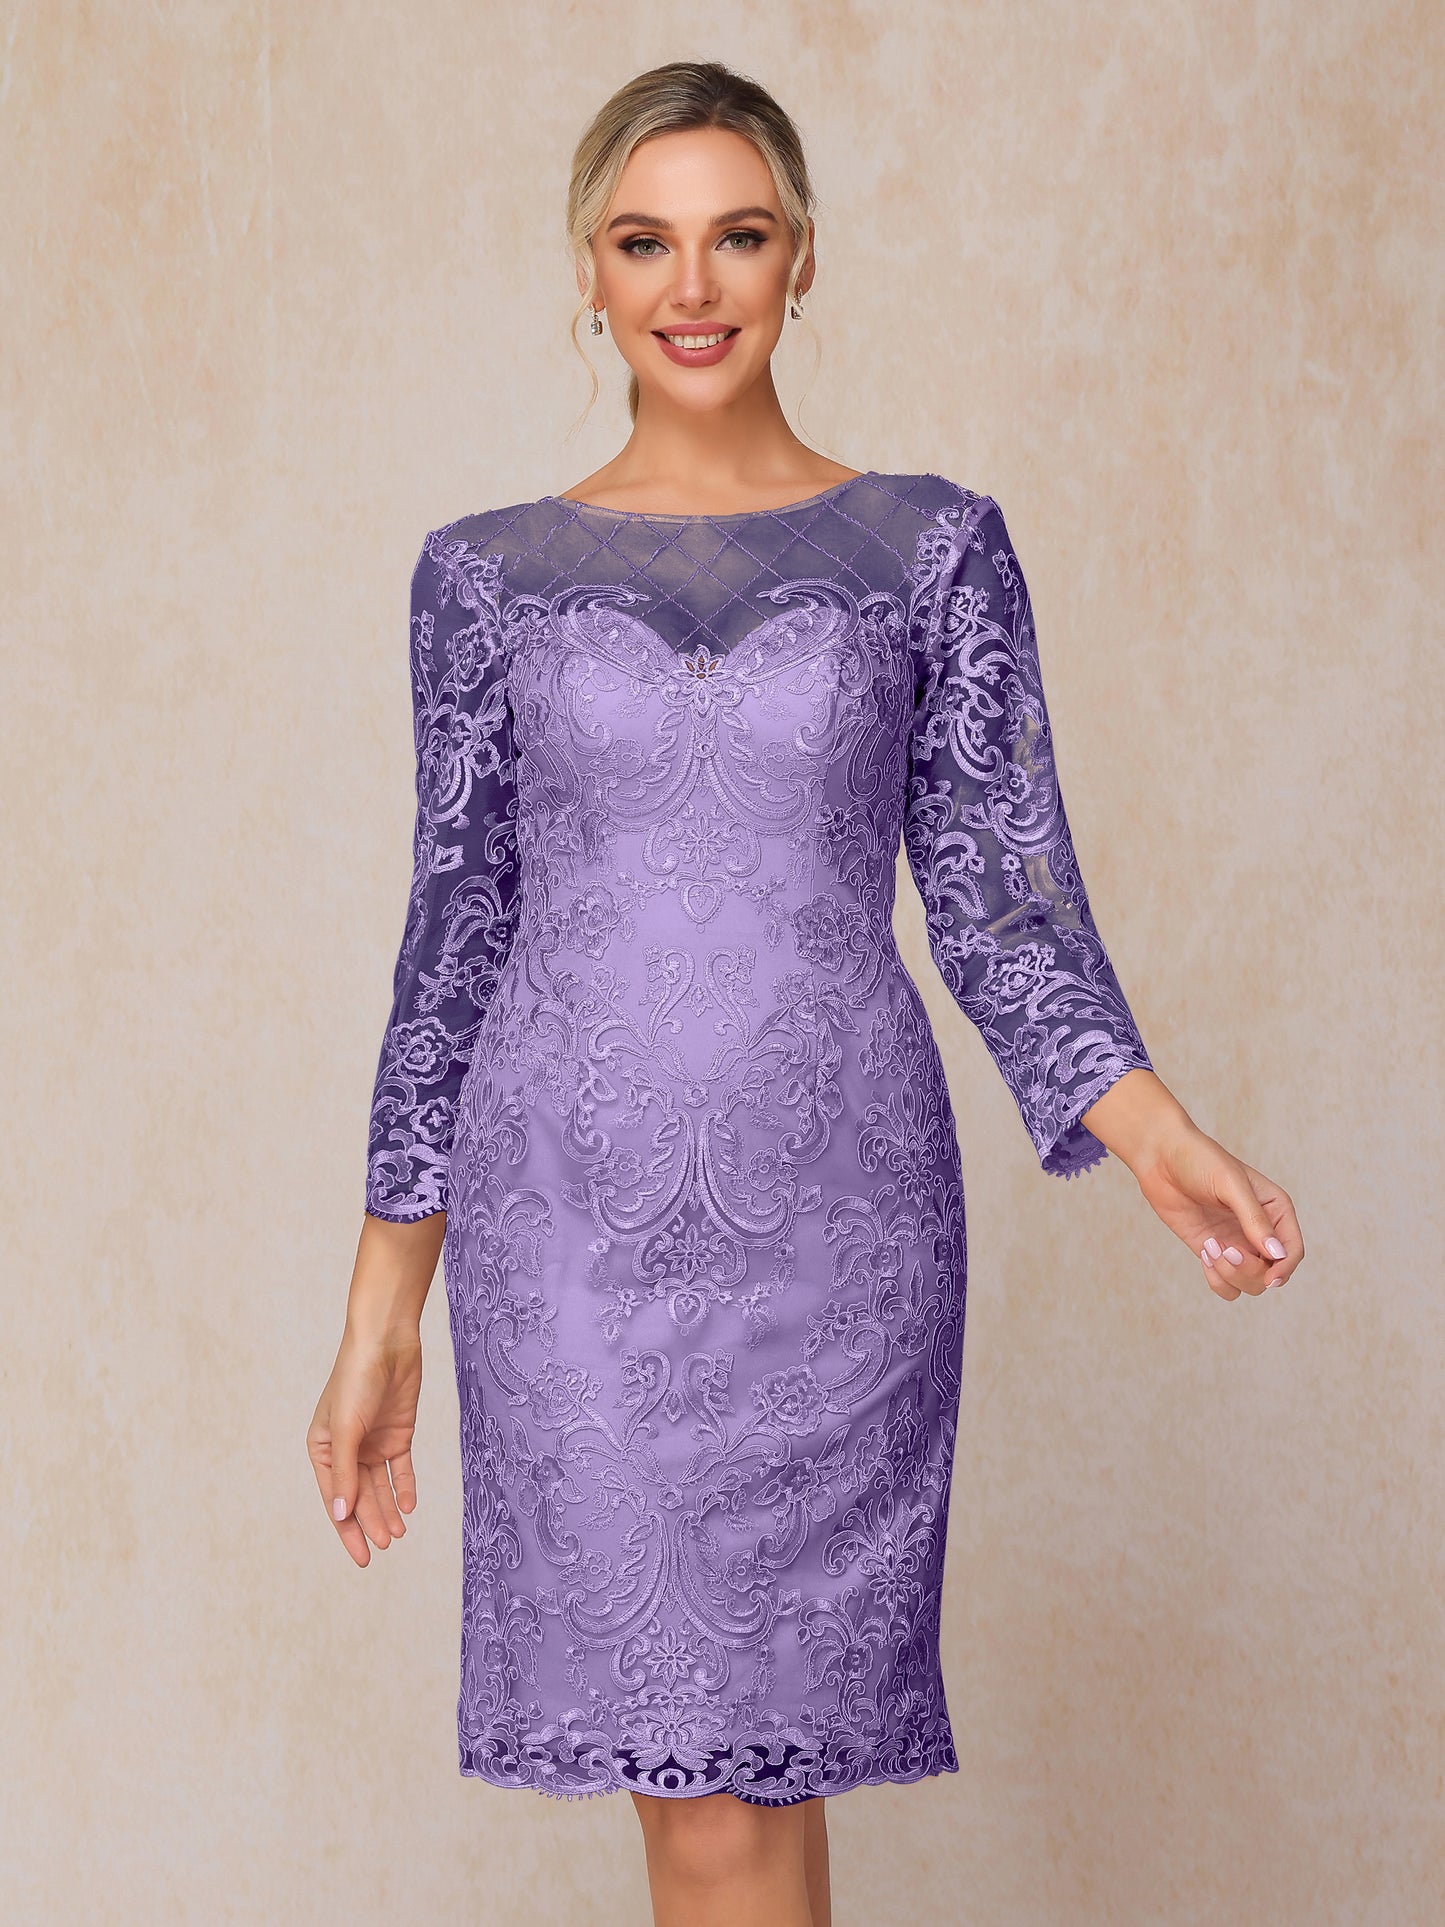 2 Pieces 3/4 Sleeves Knee Length Chiffon Lace Mother Of The Bride Dress